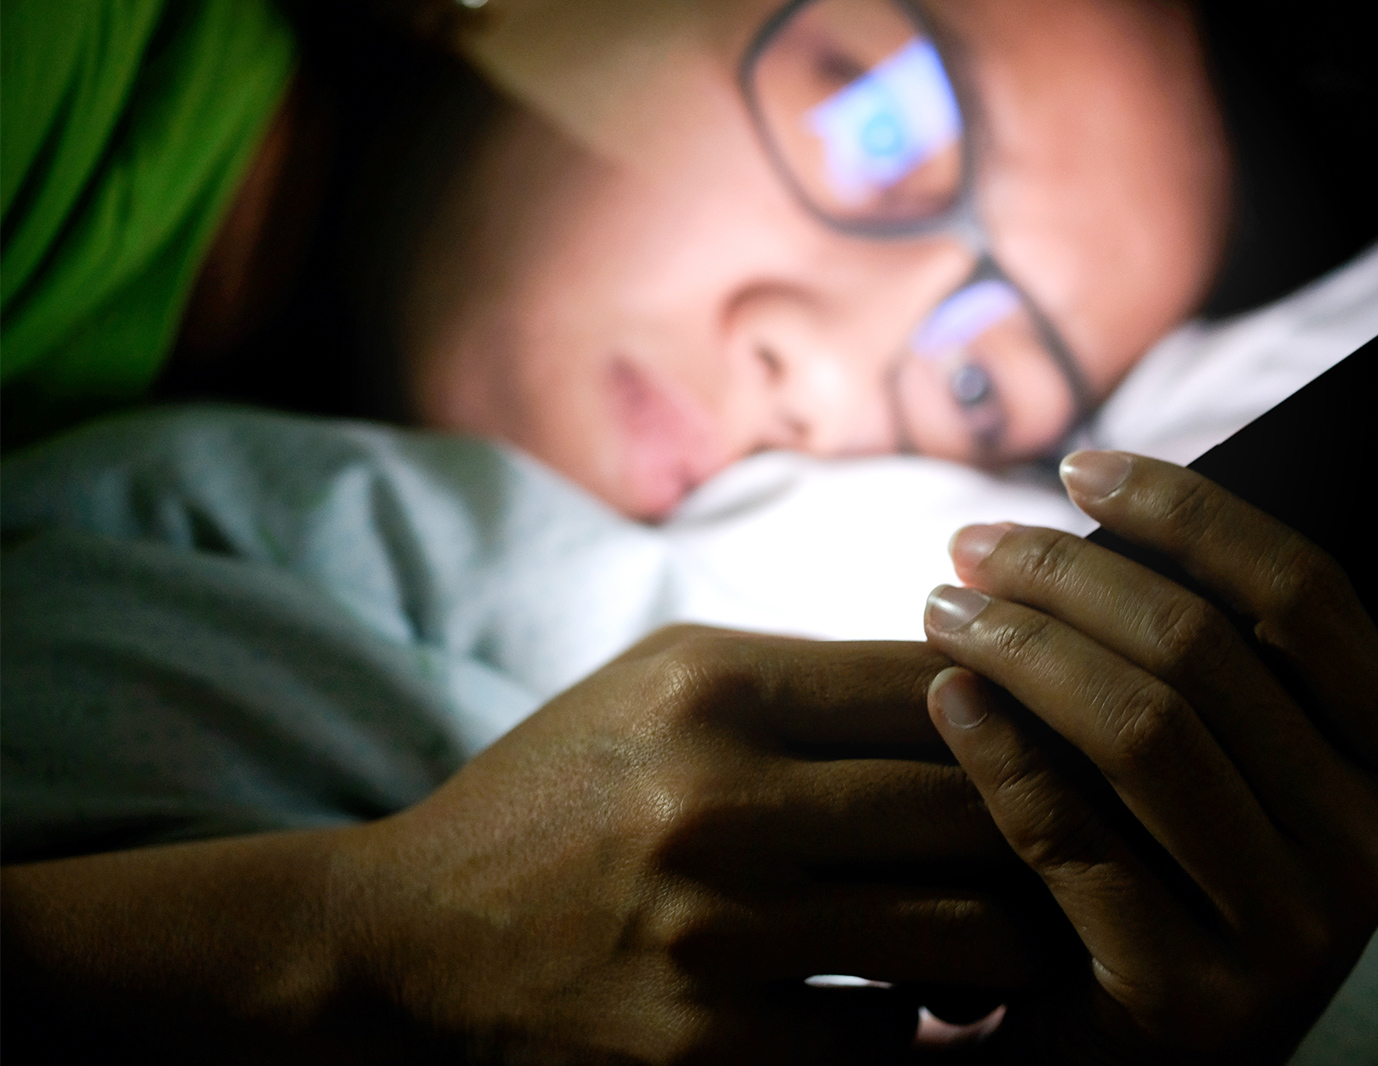 Woman looking at phone in bed at night